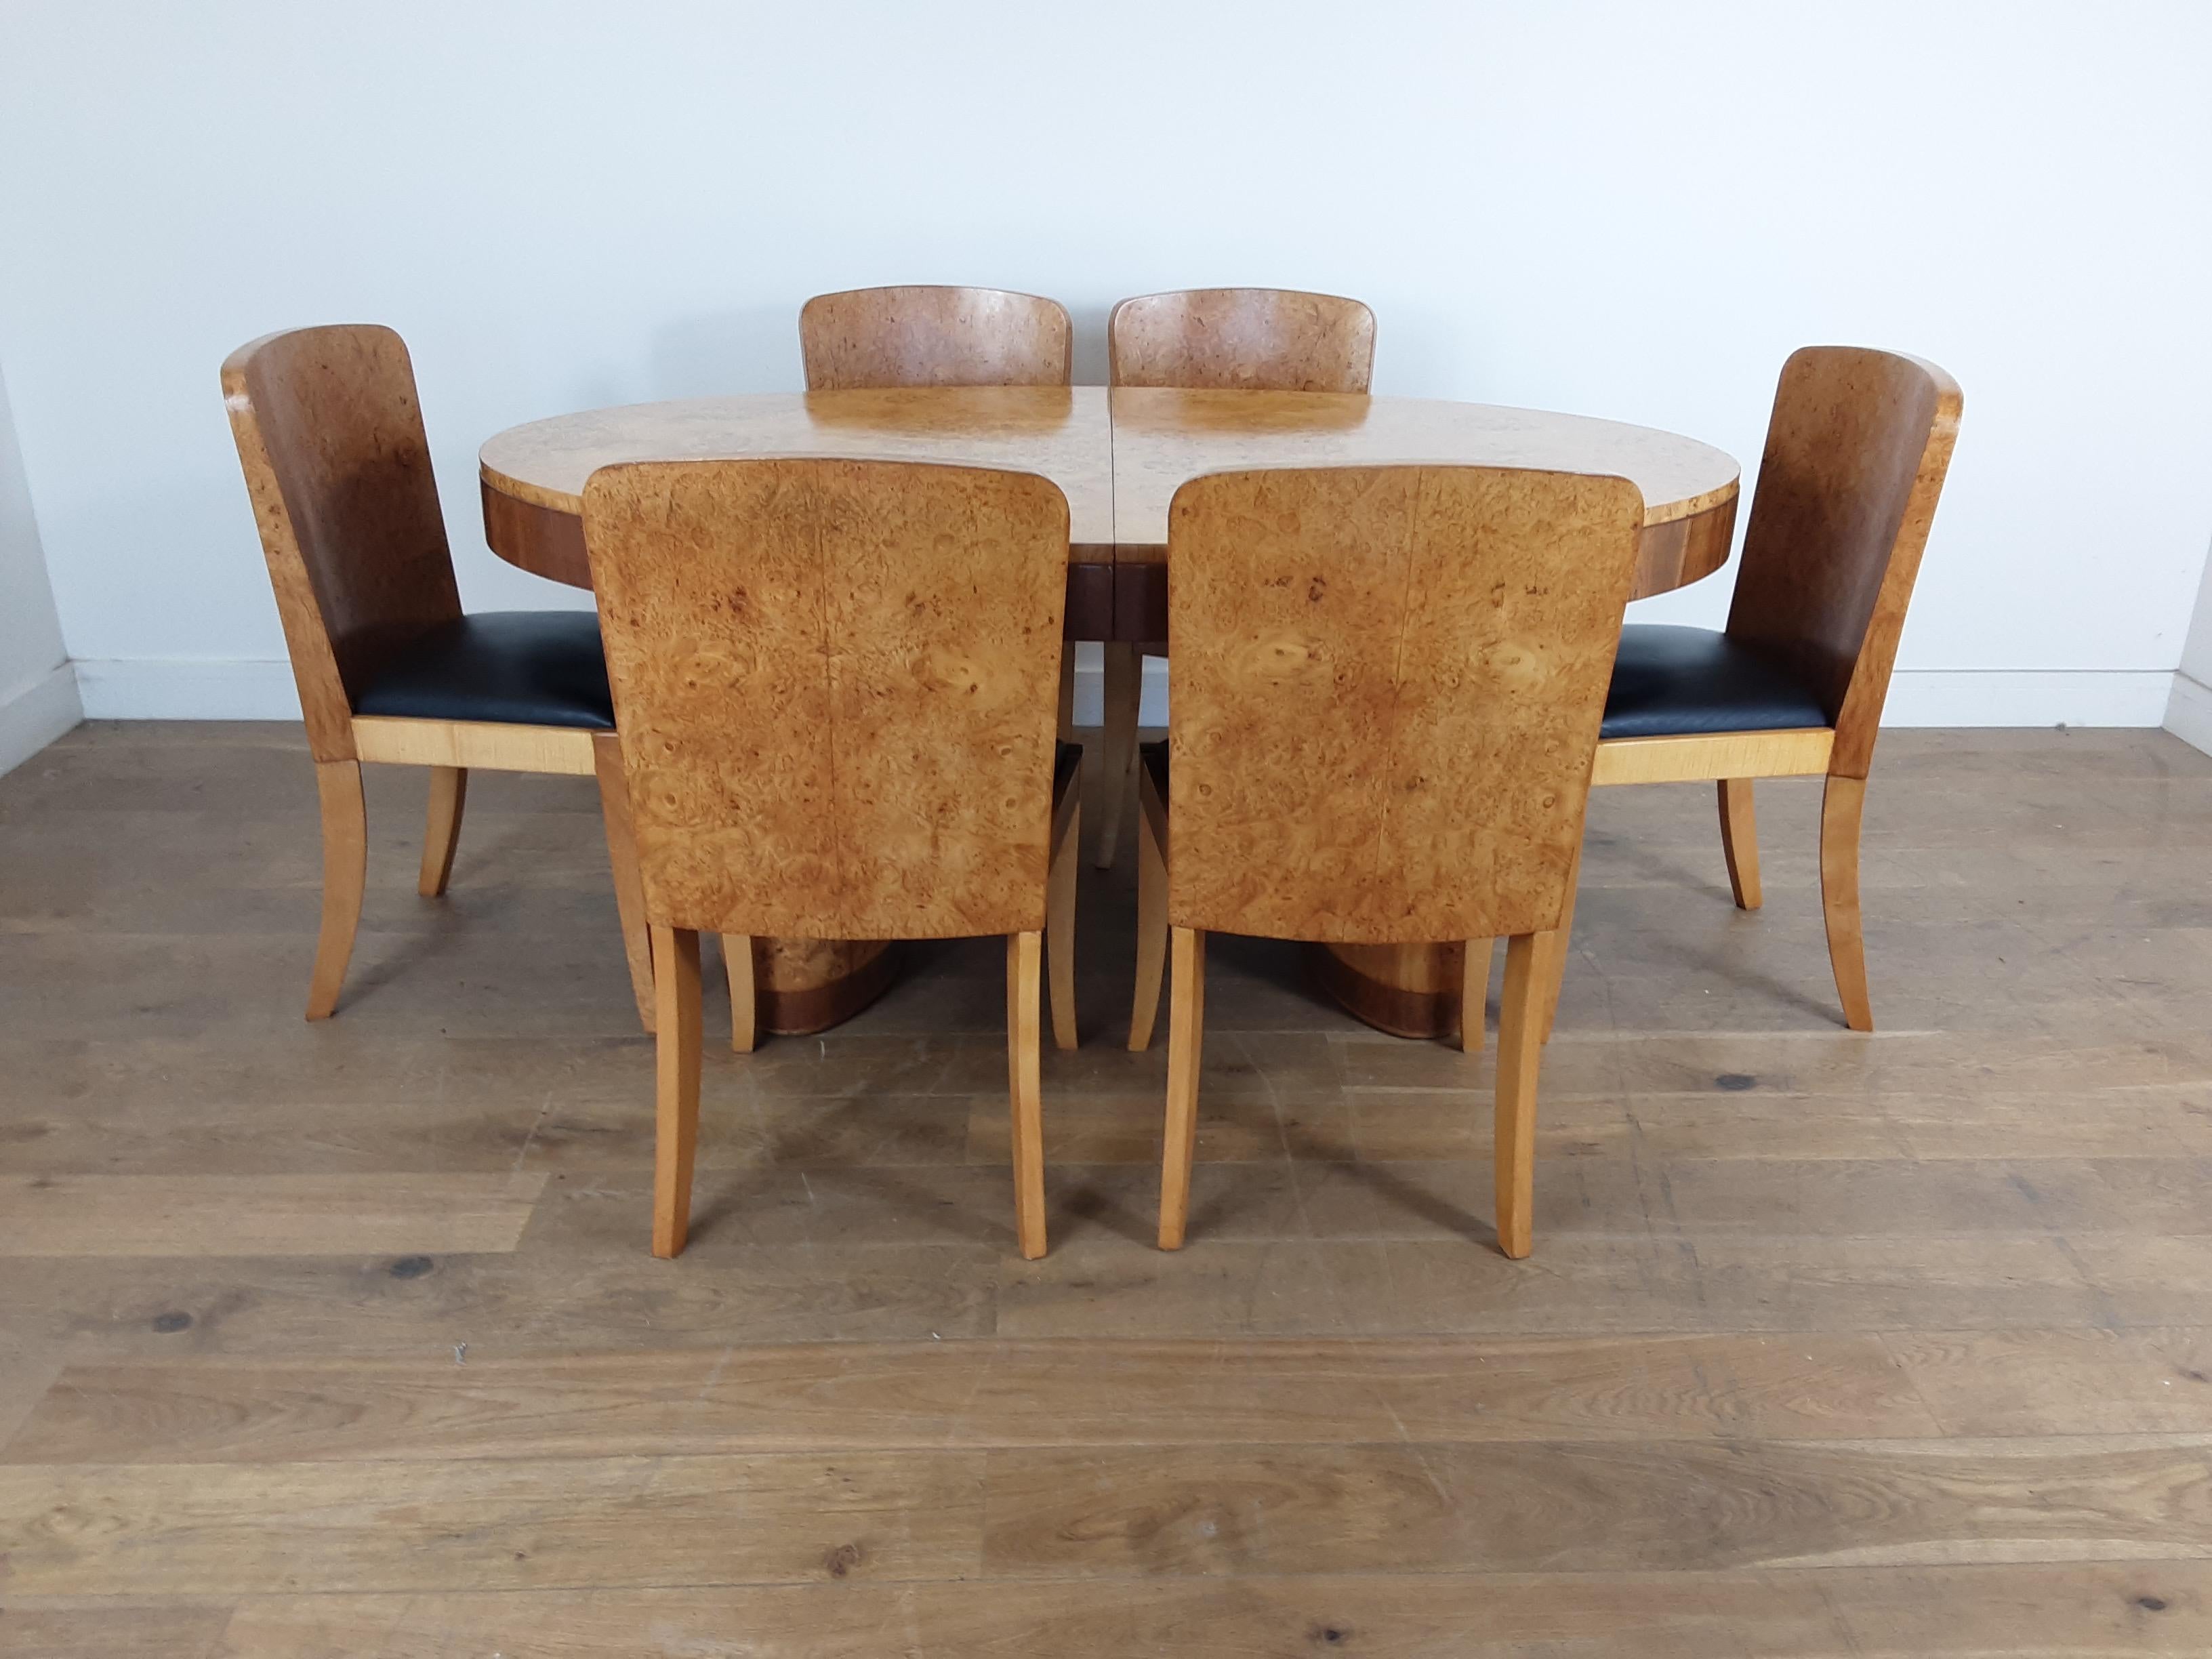 An oval Art Deco extendable dining table raised on two oval pedestals all in a stunning blond bird's-eye maple with walnut trims.
With six dining chairs in bird's-eye maple and black leather seats.
We also have glass tops for this table, two half